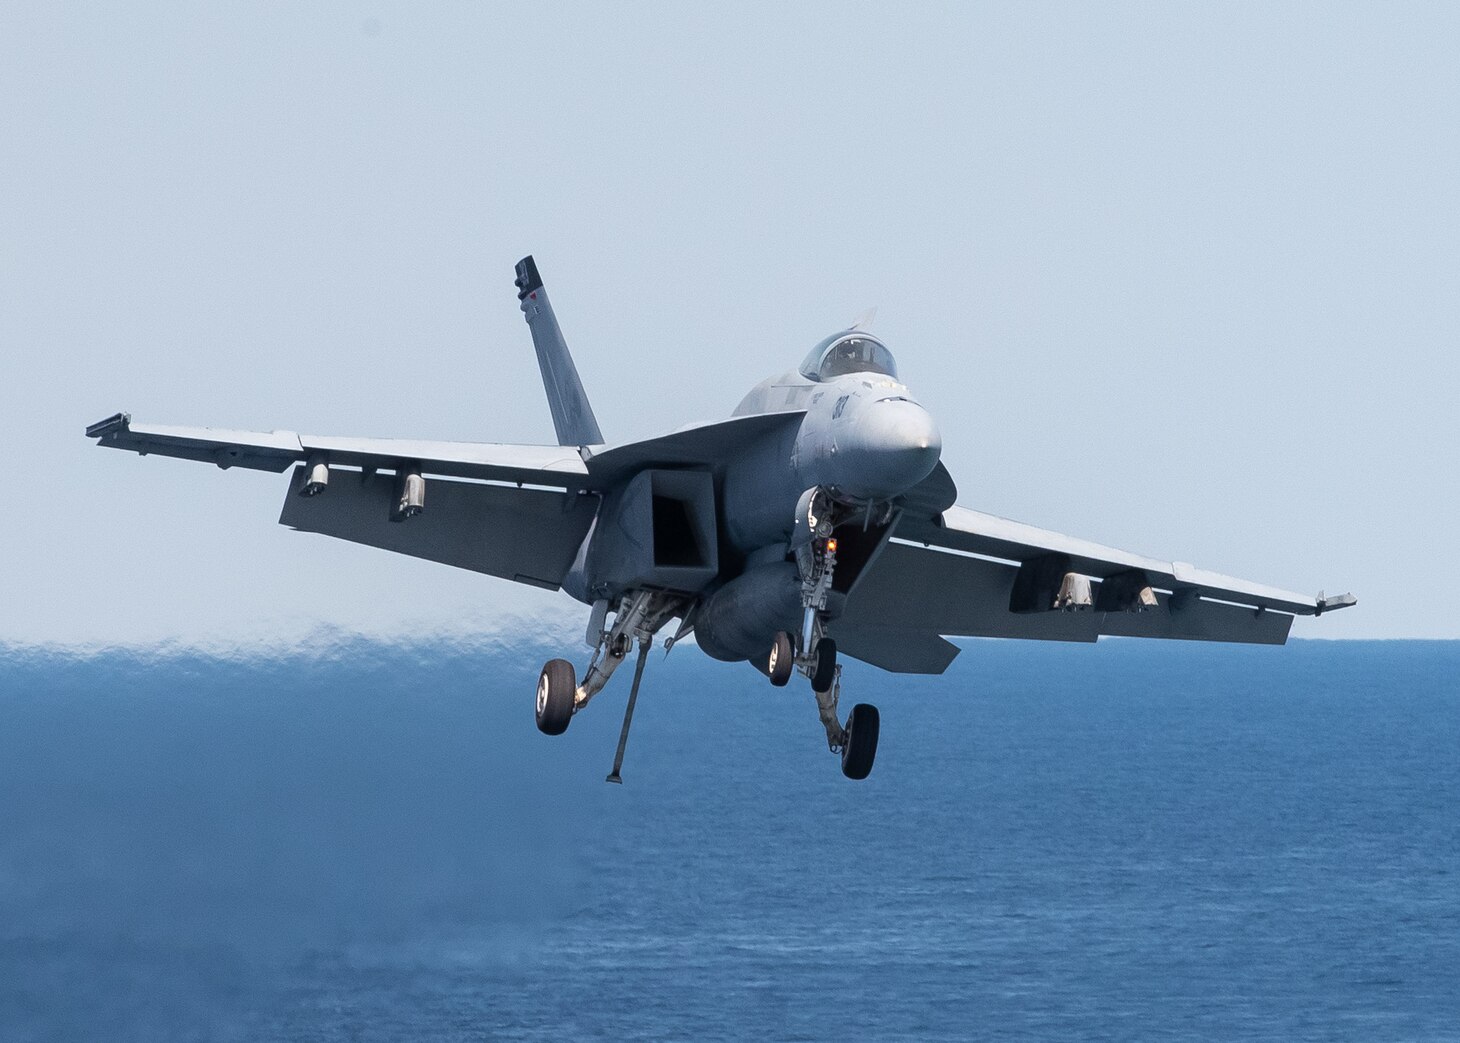 An F/A-18E Super Hornet, attached to the "Tomcatters" of Strike Fighter Squadron (VFA) 31, approaches the Gerald R. Ford-class aircraft carrier USS Gerald R. Ford’s (CVN 78) flight deck, April 11, 2022.